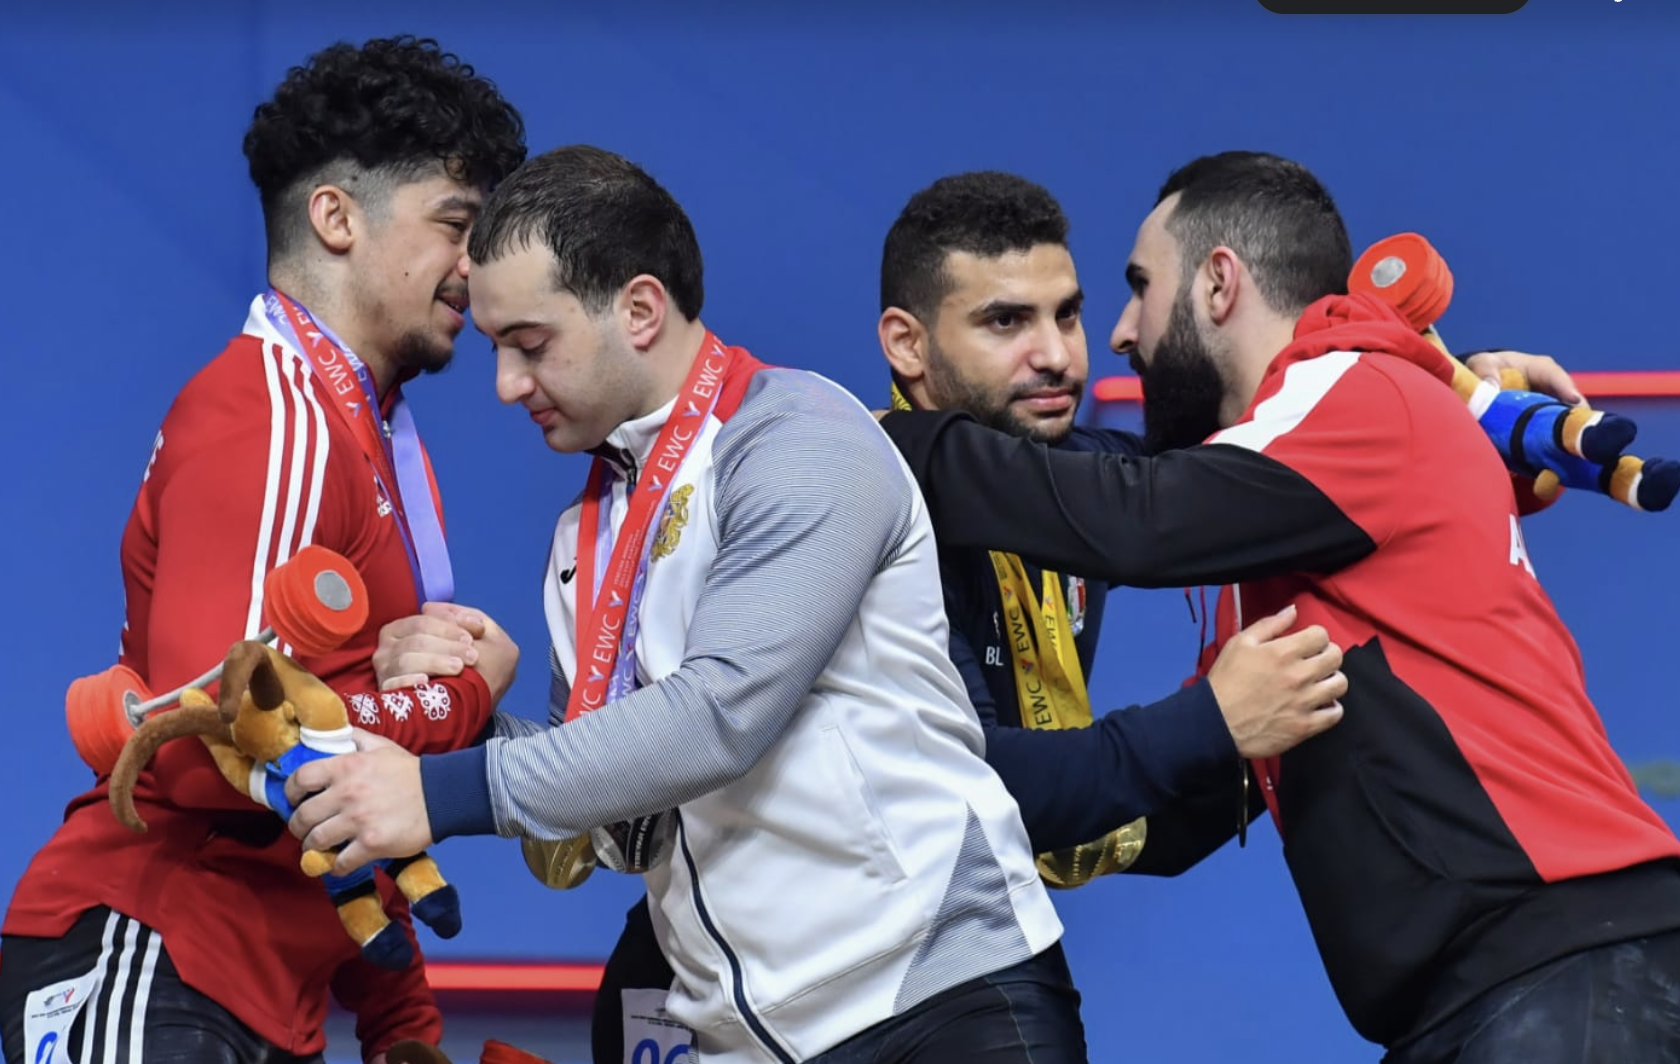 Turkish and Armenian lifters embrace each other on the podium following the men's 81 kilograms category ©Brian Oliver